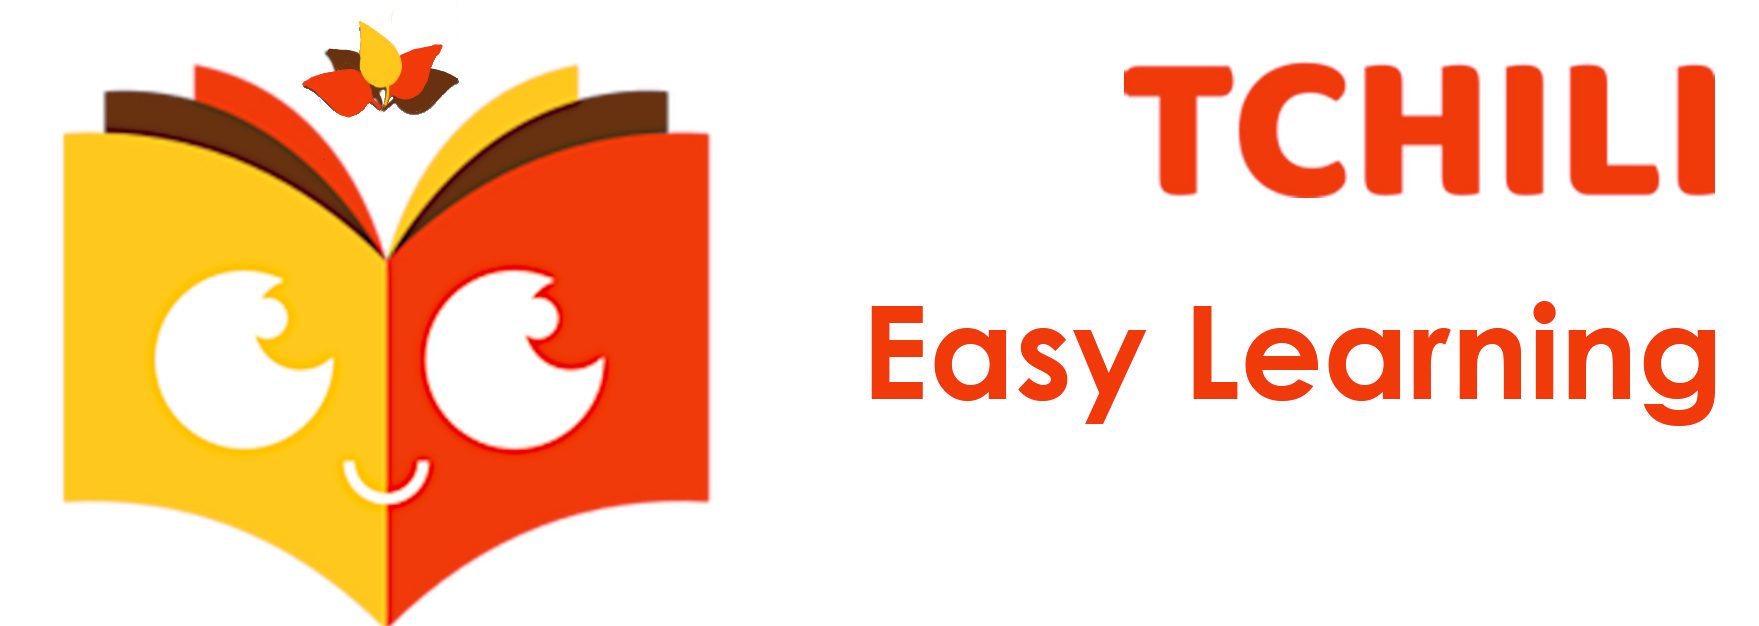 Tchili Easy Learning – Book your camp